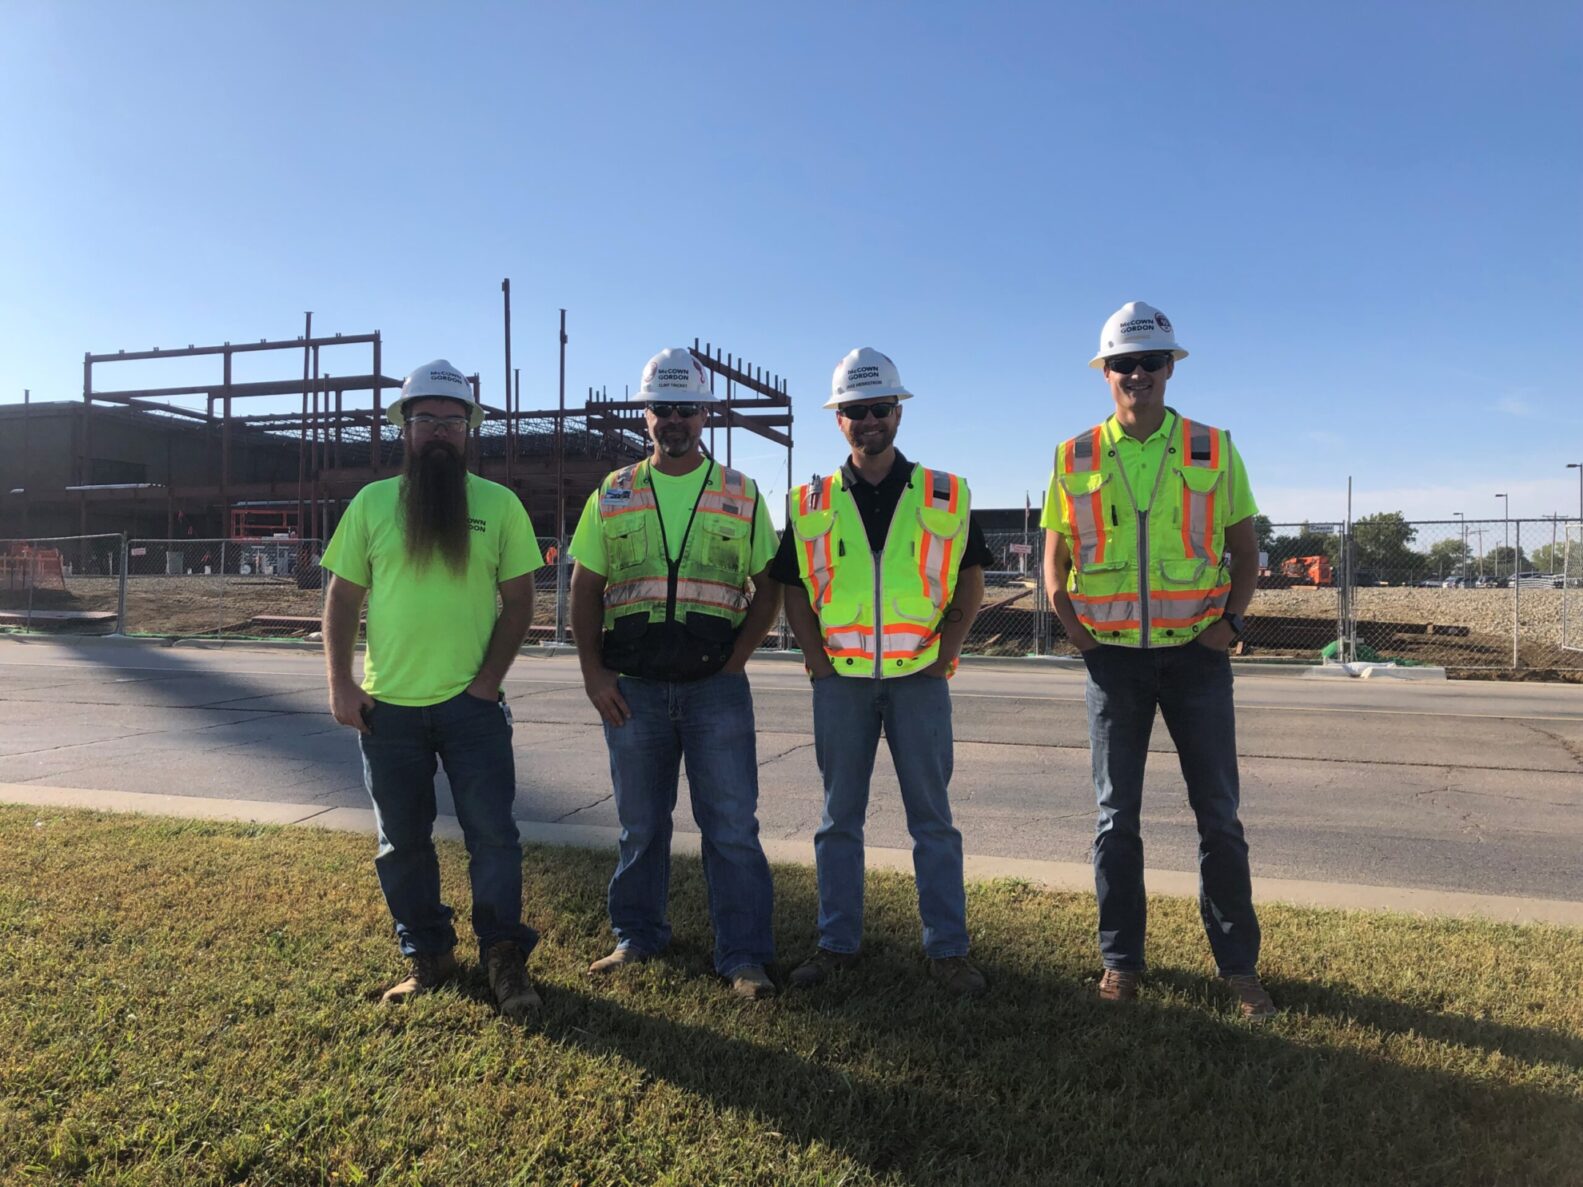 Jake Herrstrom and his team at a McCownGordon Construction site